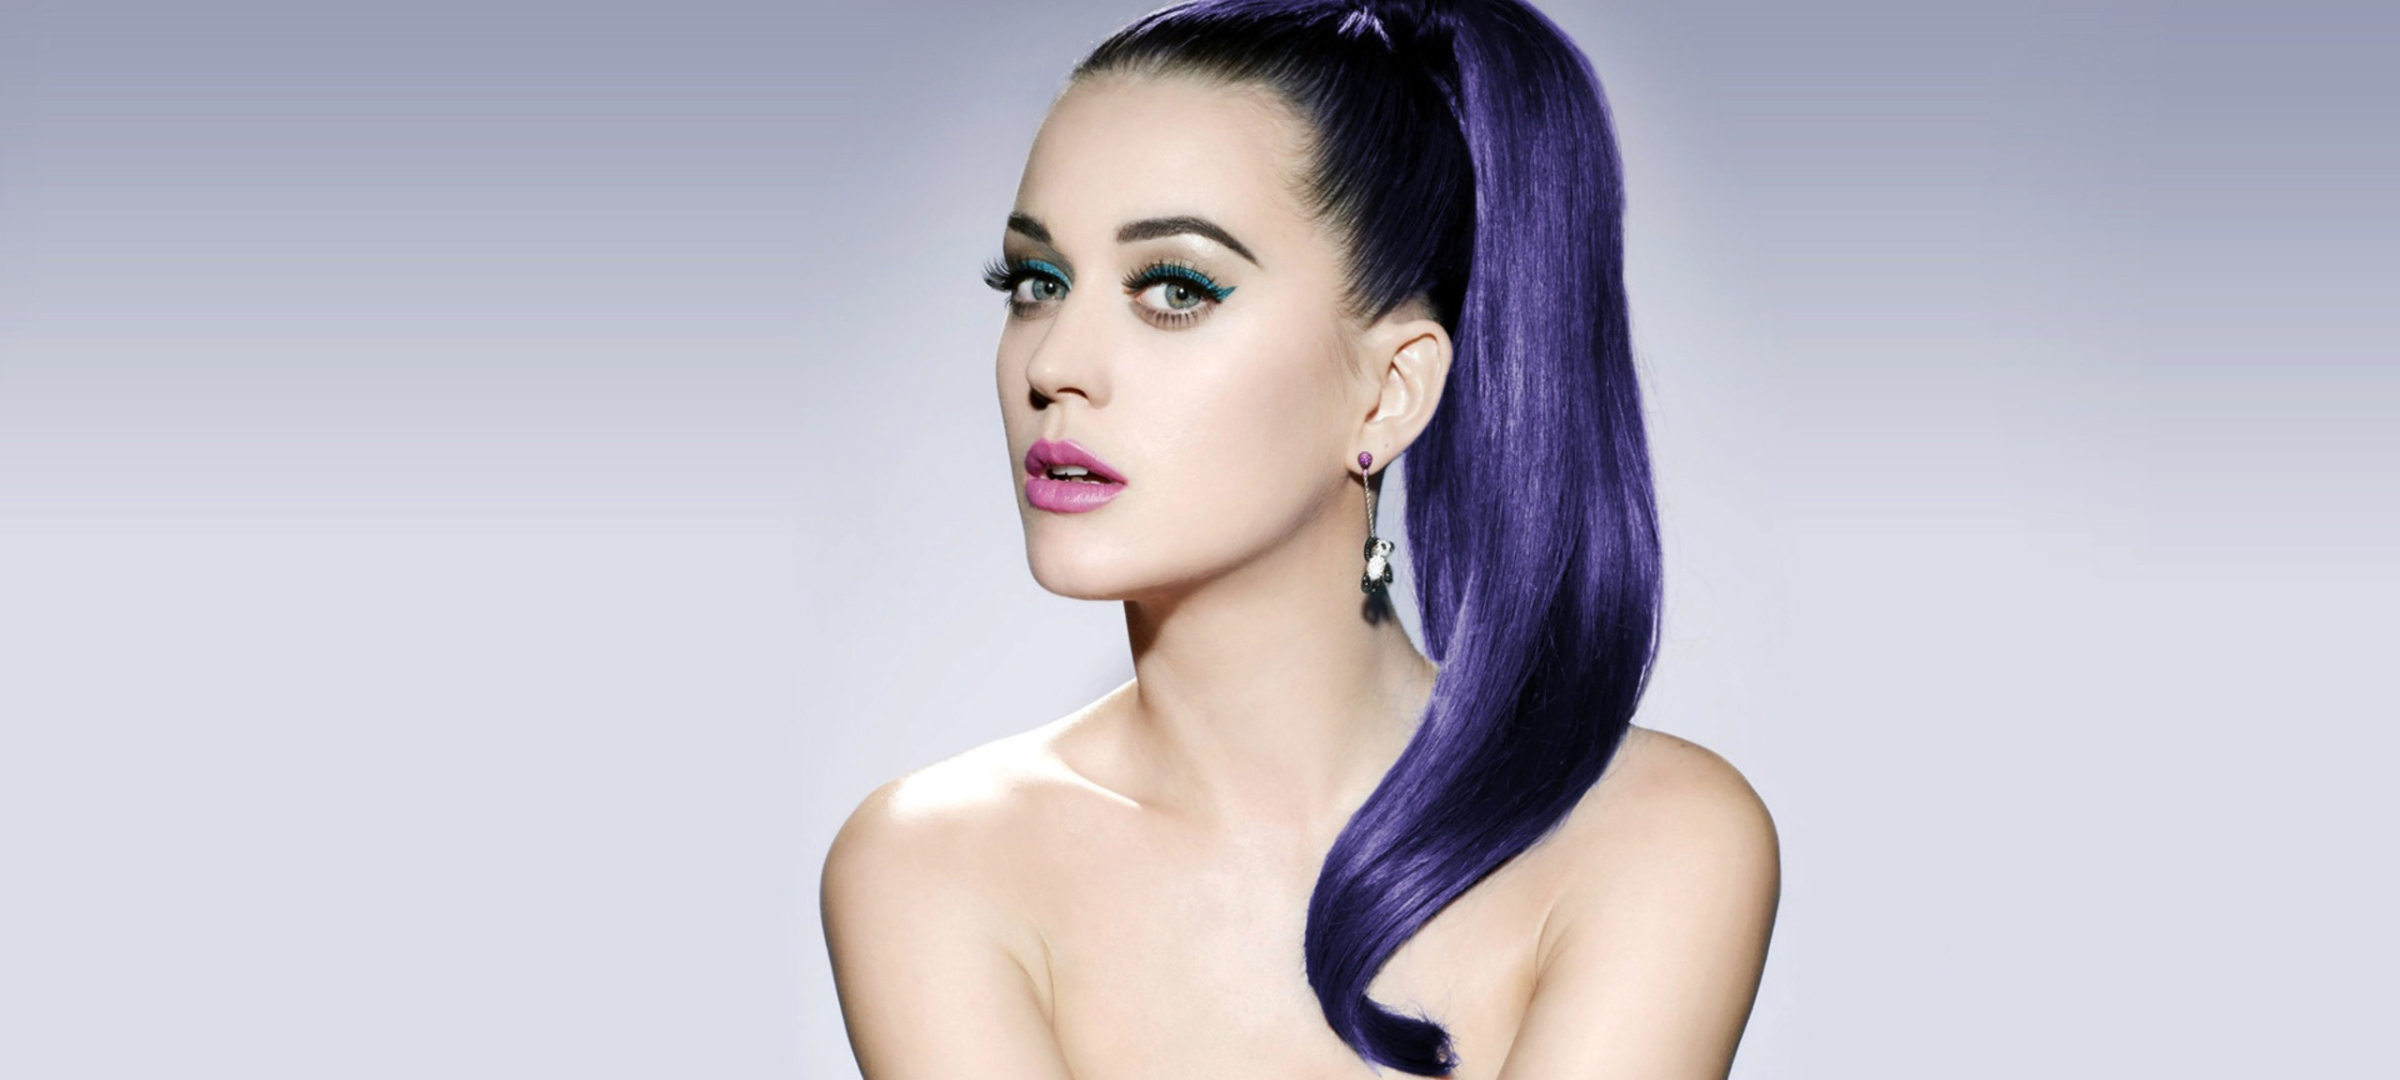 2400x1080 Resolution Katy Perry Stunning wallpapers 2400x1080 ...